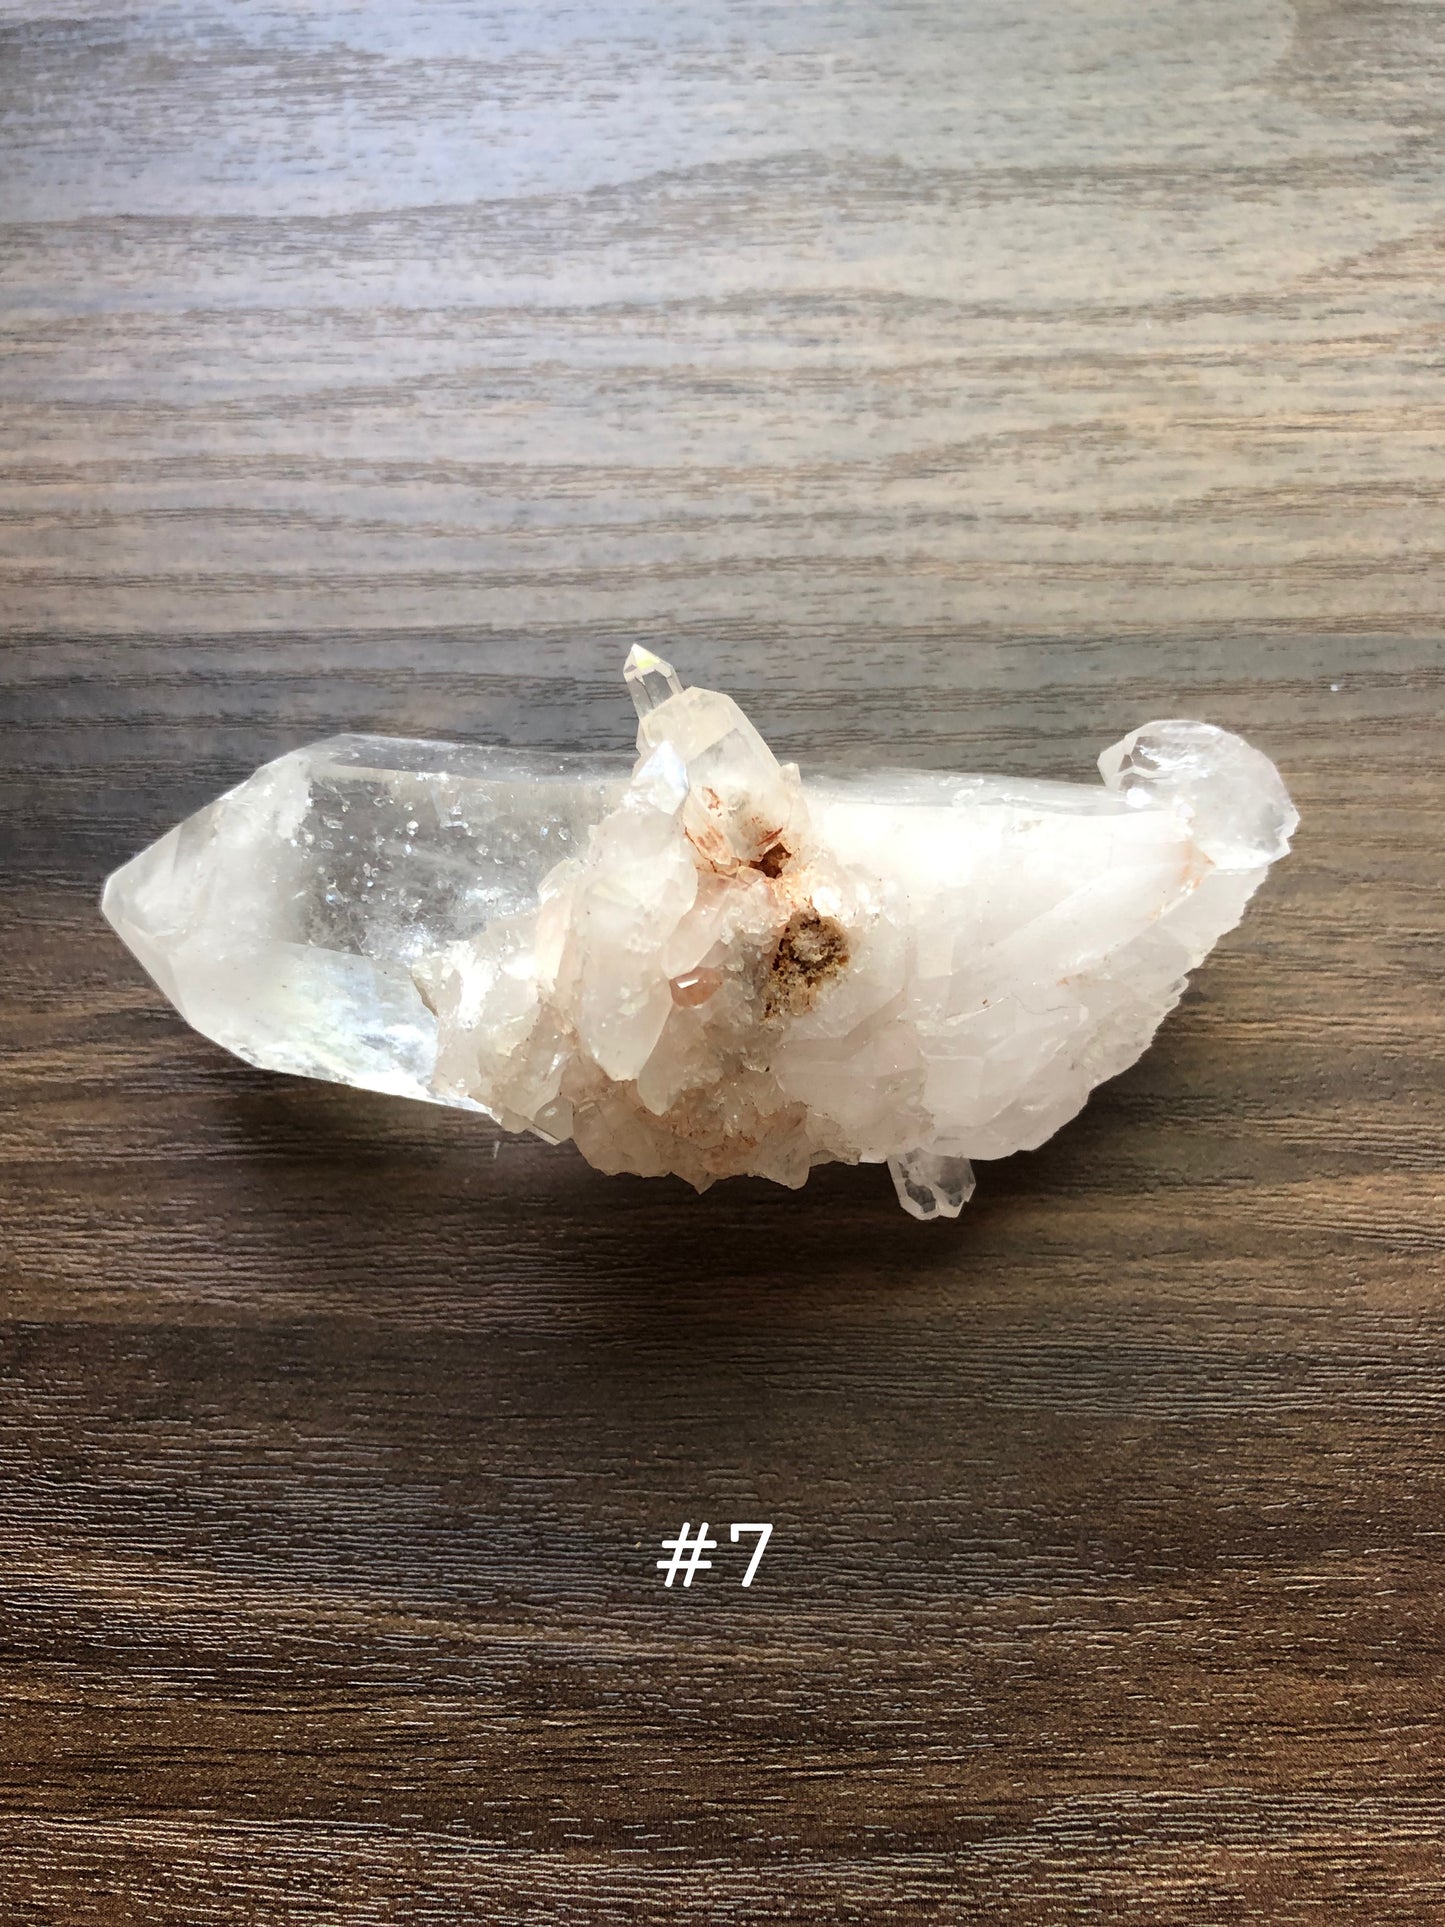 A large, rough cut quartz crystal rests on a wooden surface. It is jagged, with small clusters on it.  The crystal is relatively clear, with the clusters being slightly discolored. The number 7 is shown on the picture.